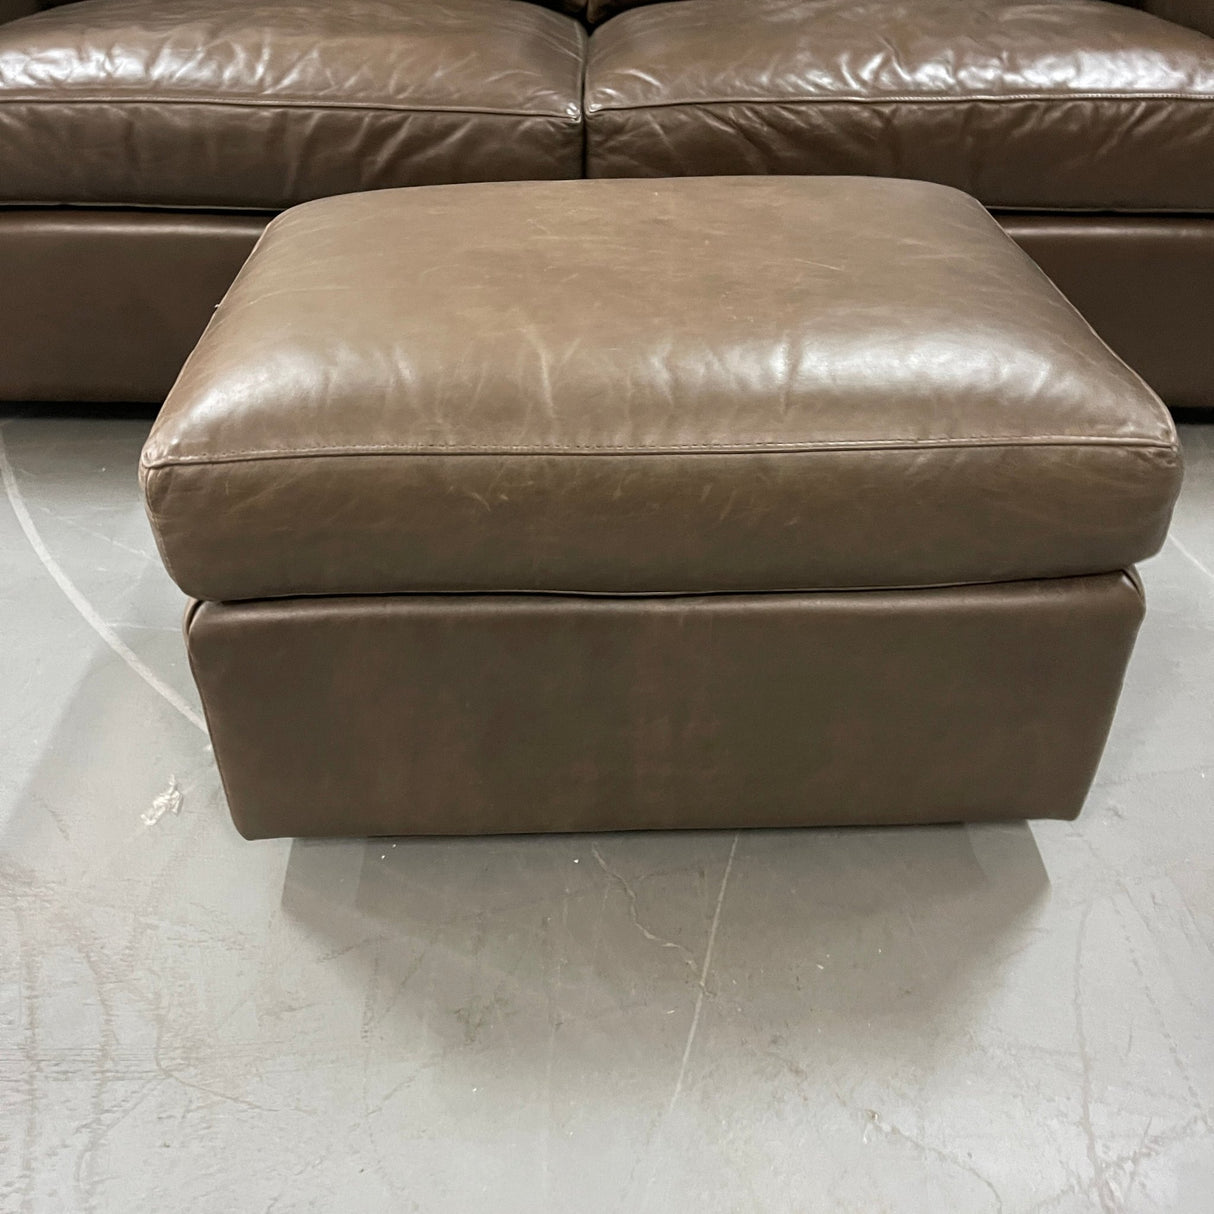 Crate and Barrel Leather Track Arm Sofa - enliven mart